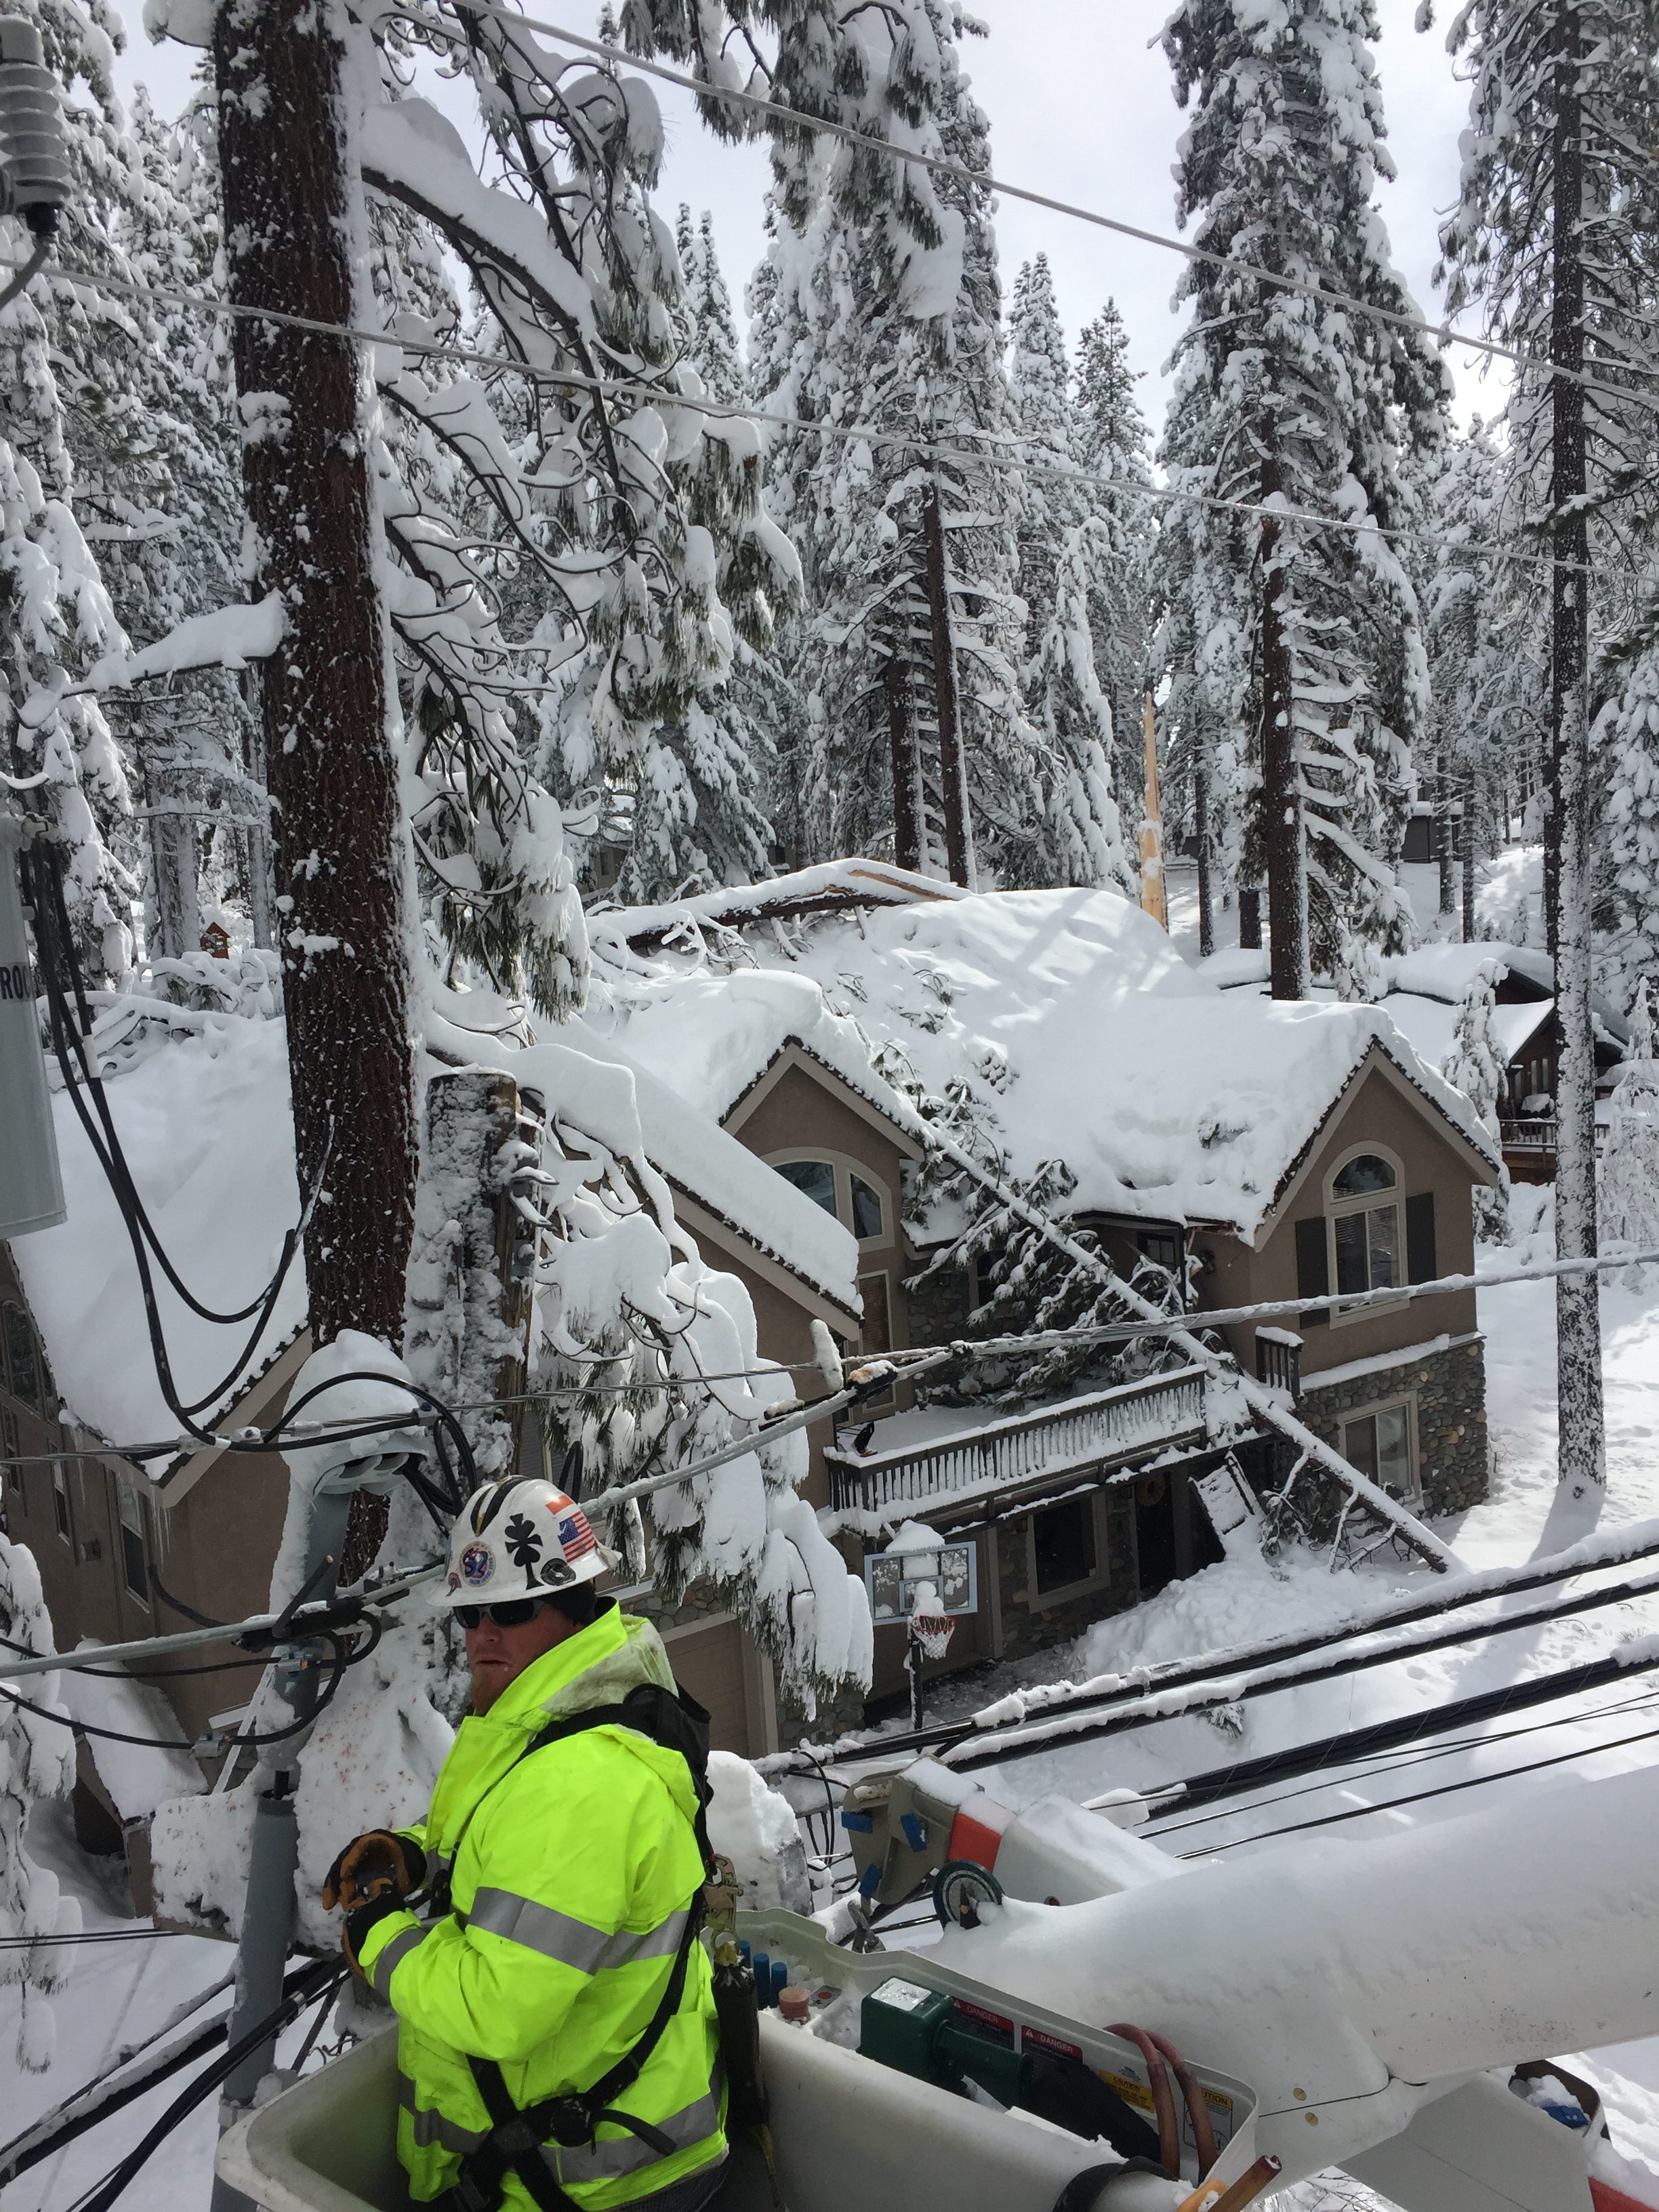 NV Energy Lineman Jeremy Parks making repairs on lines that were brought down by trees weighted down with snow